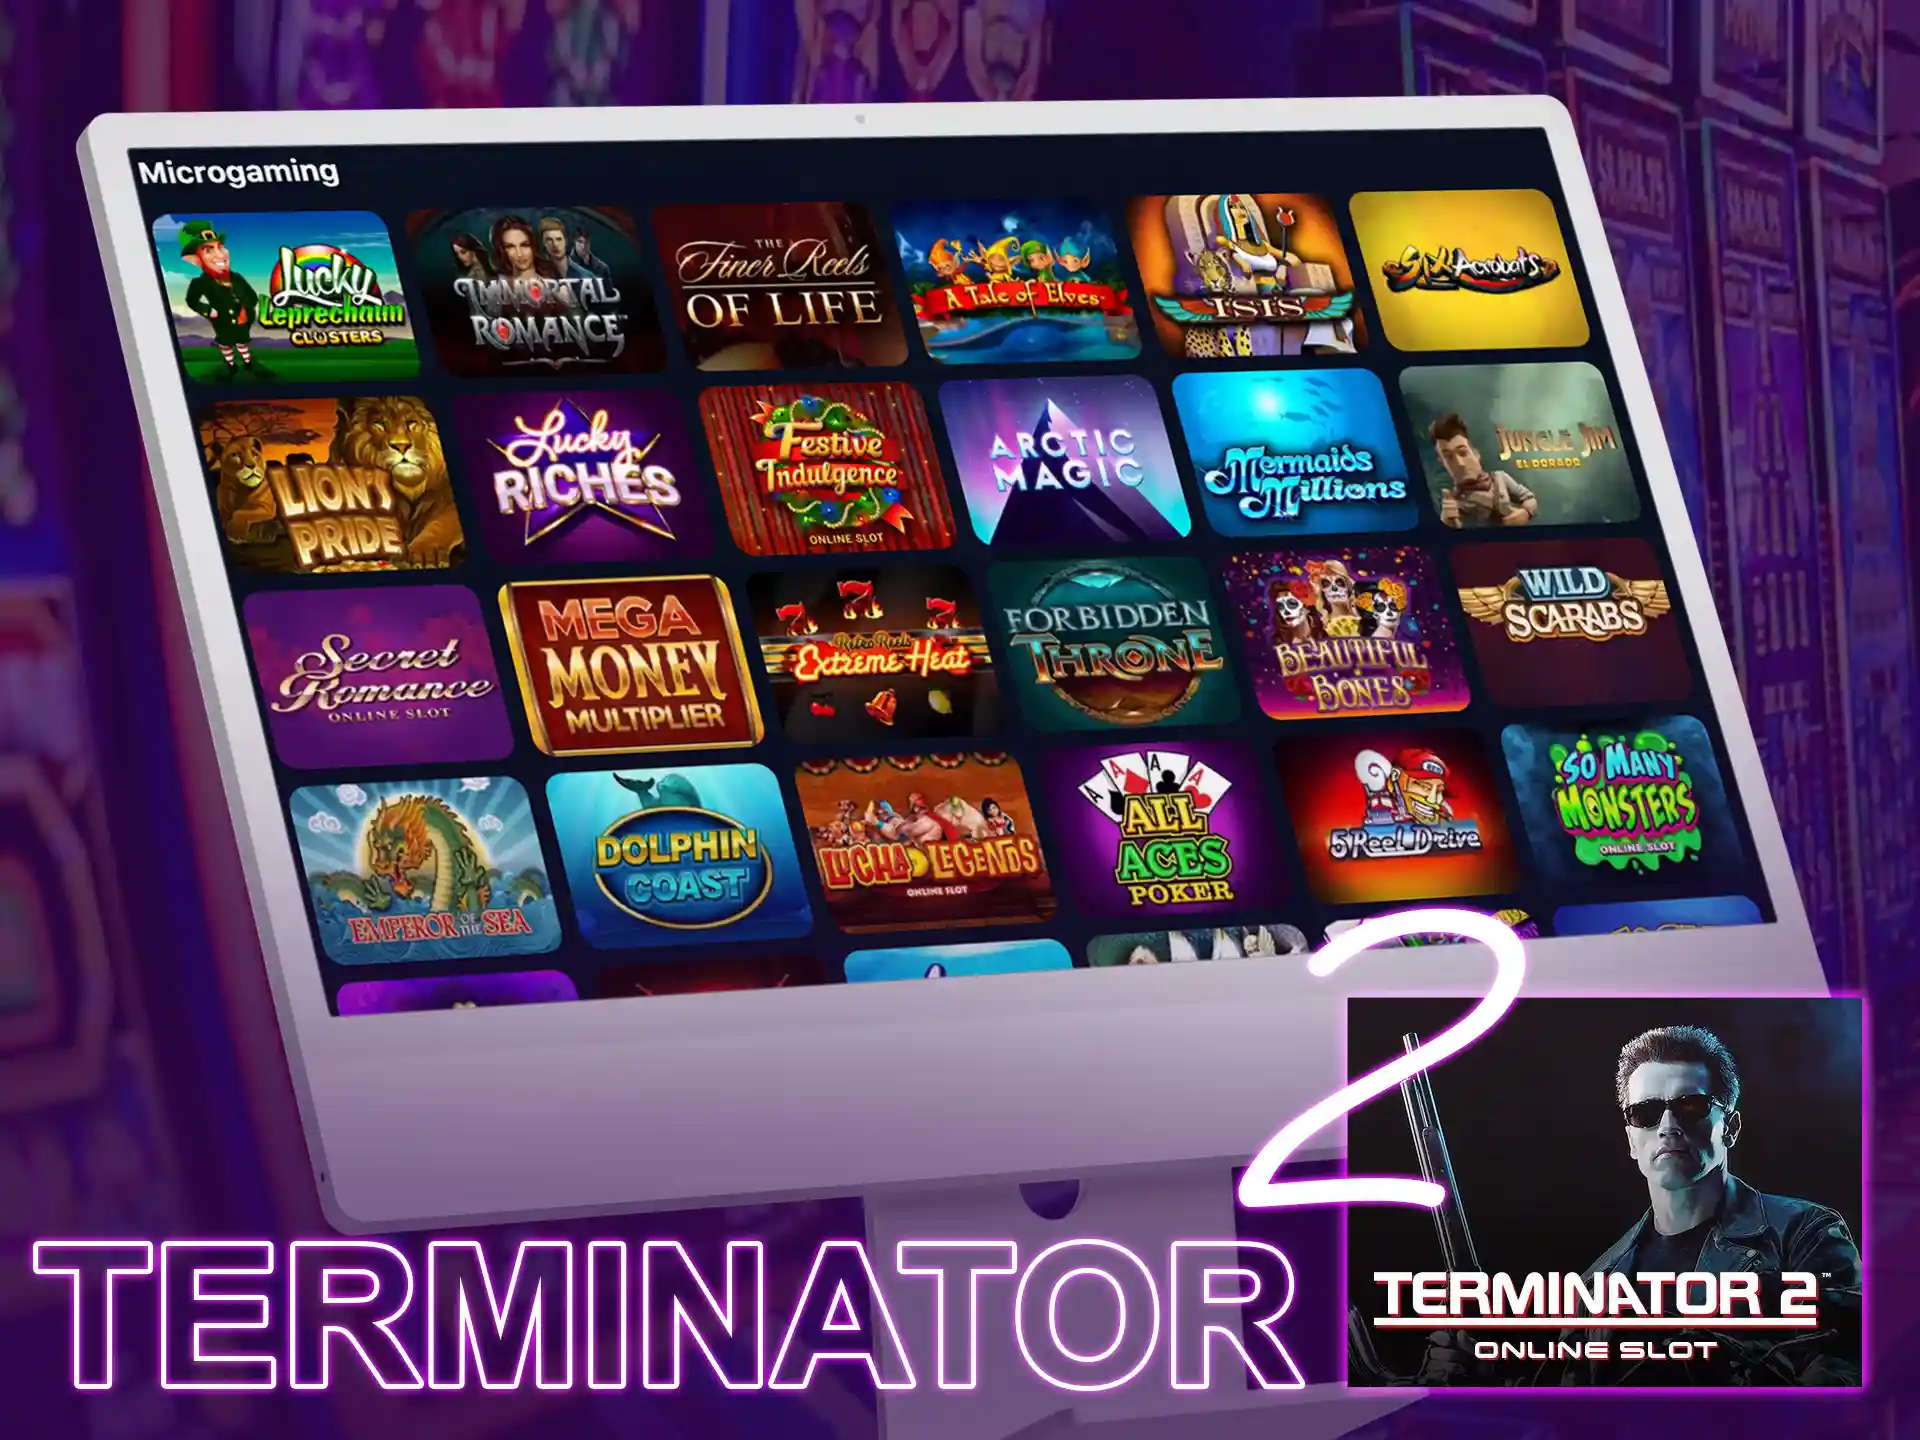 Play Terminator 2 slot and get free spins.